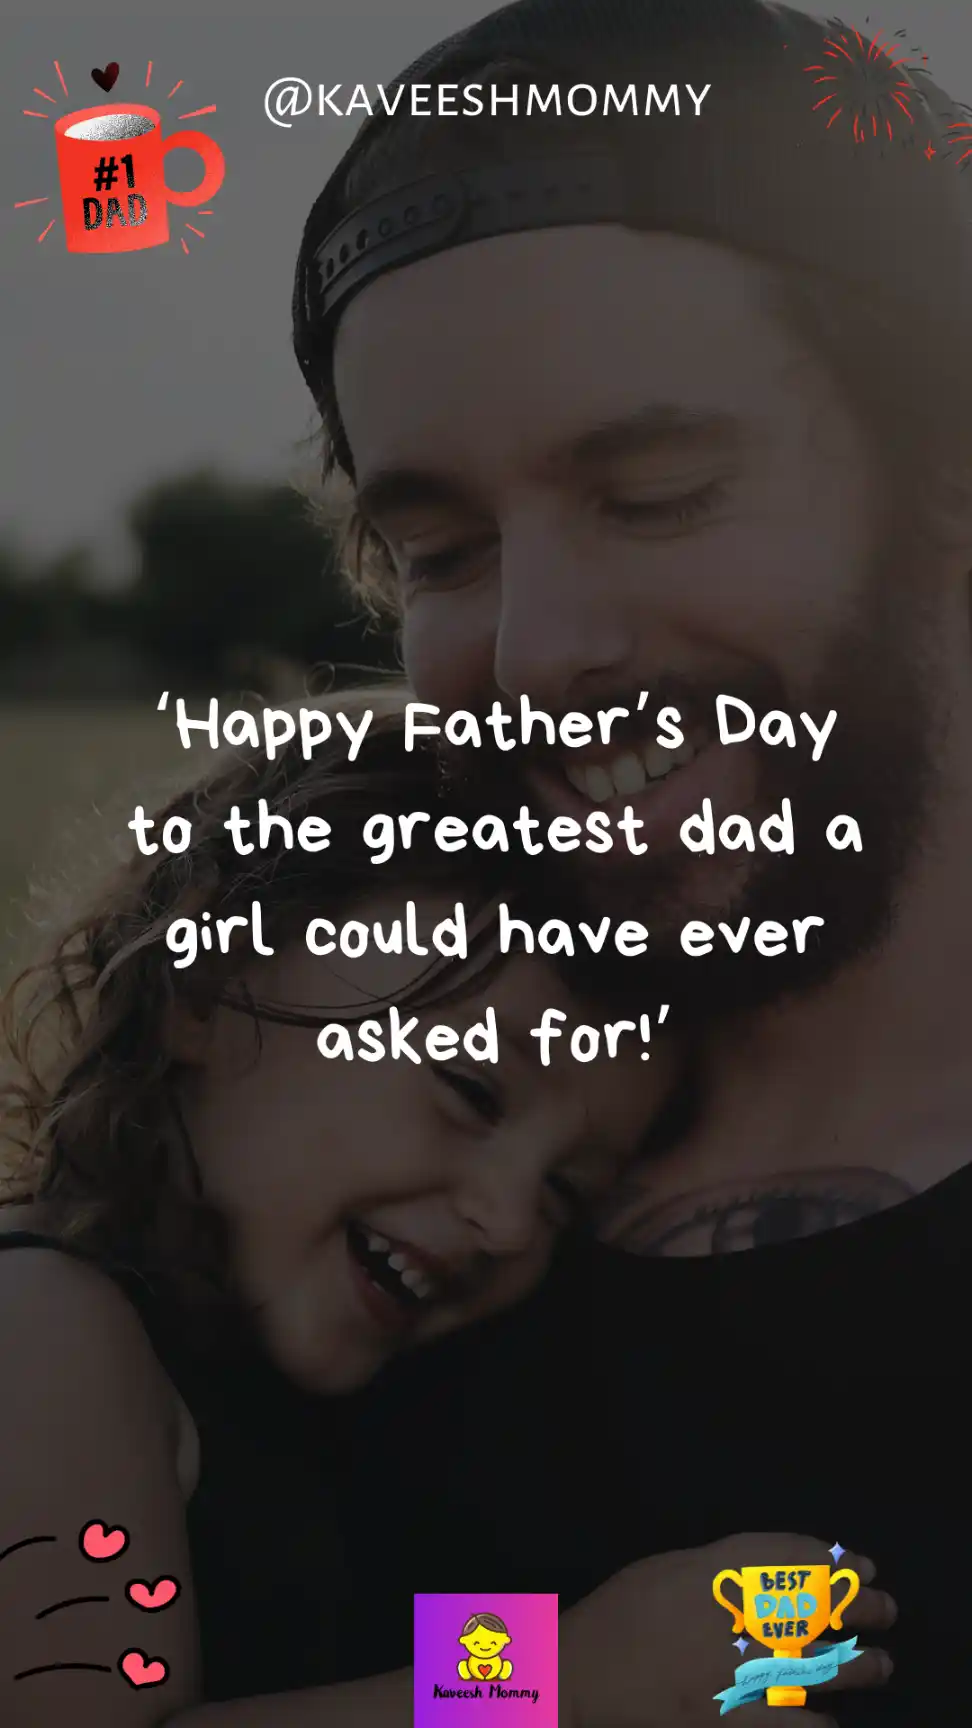 happy fathers day wishes from daughter-‘Happy Father’s Day to the greatest dad a girl could have ever asked for!’